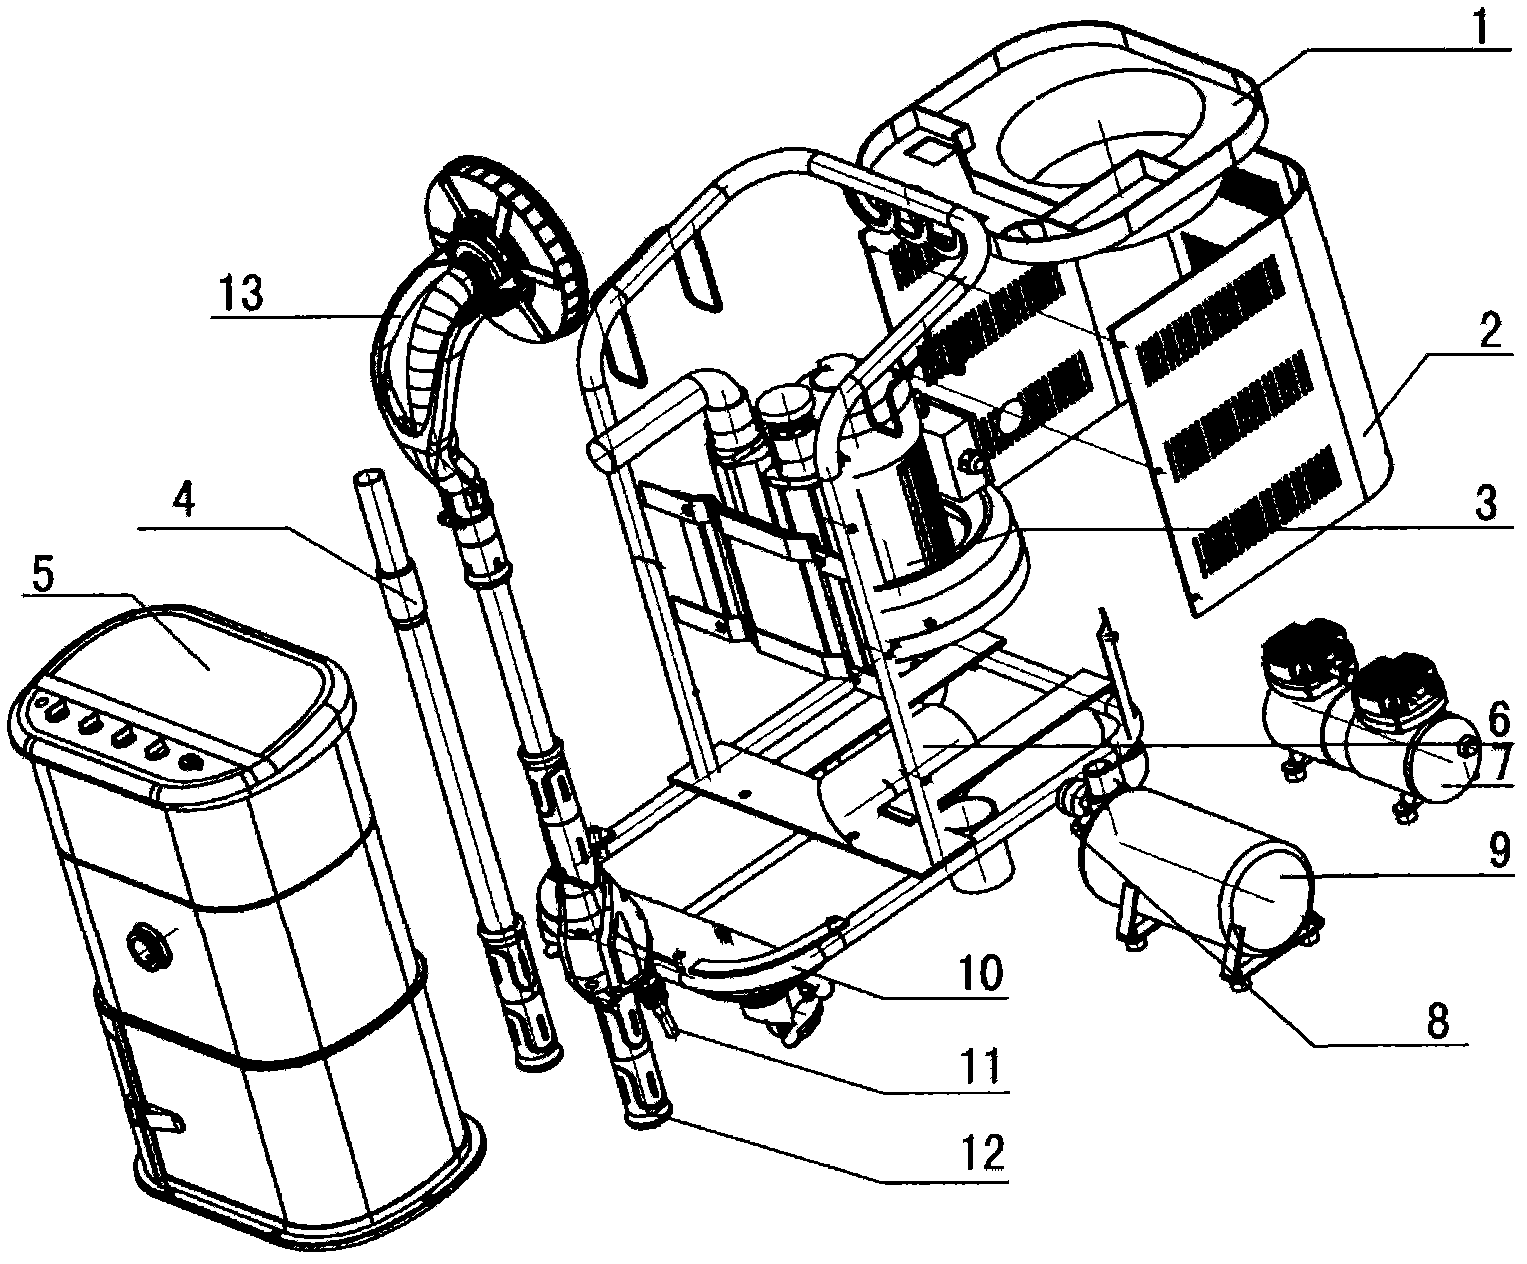 Integrated cart of dust removal polisher